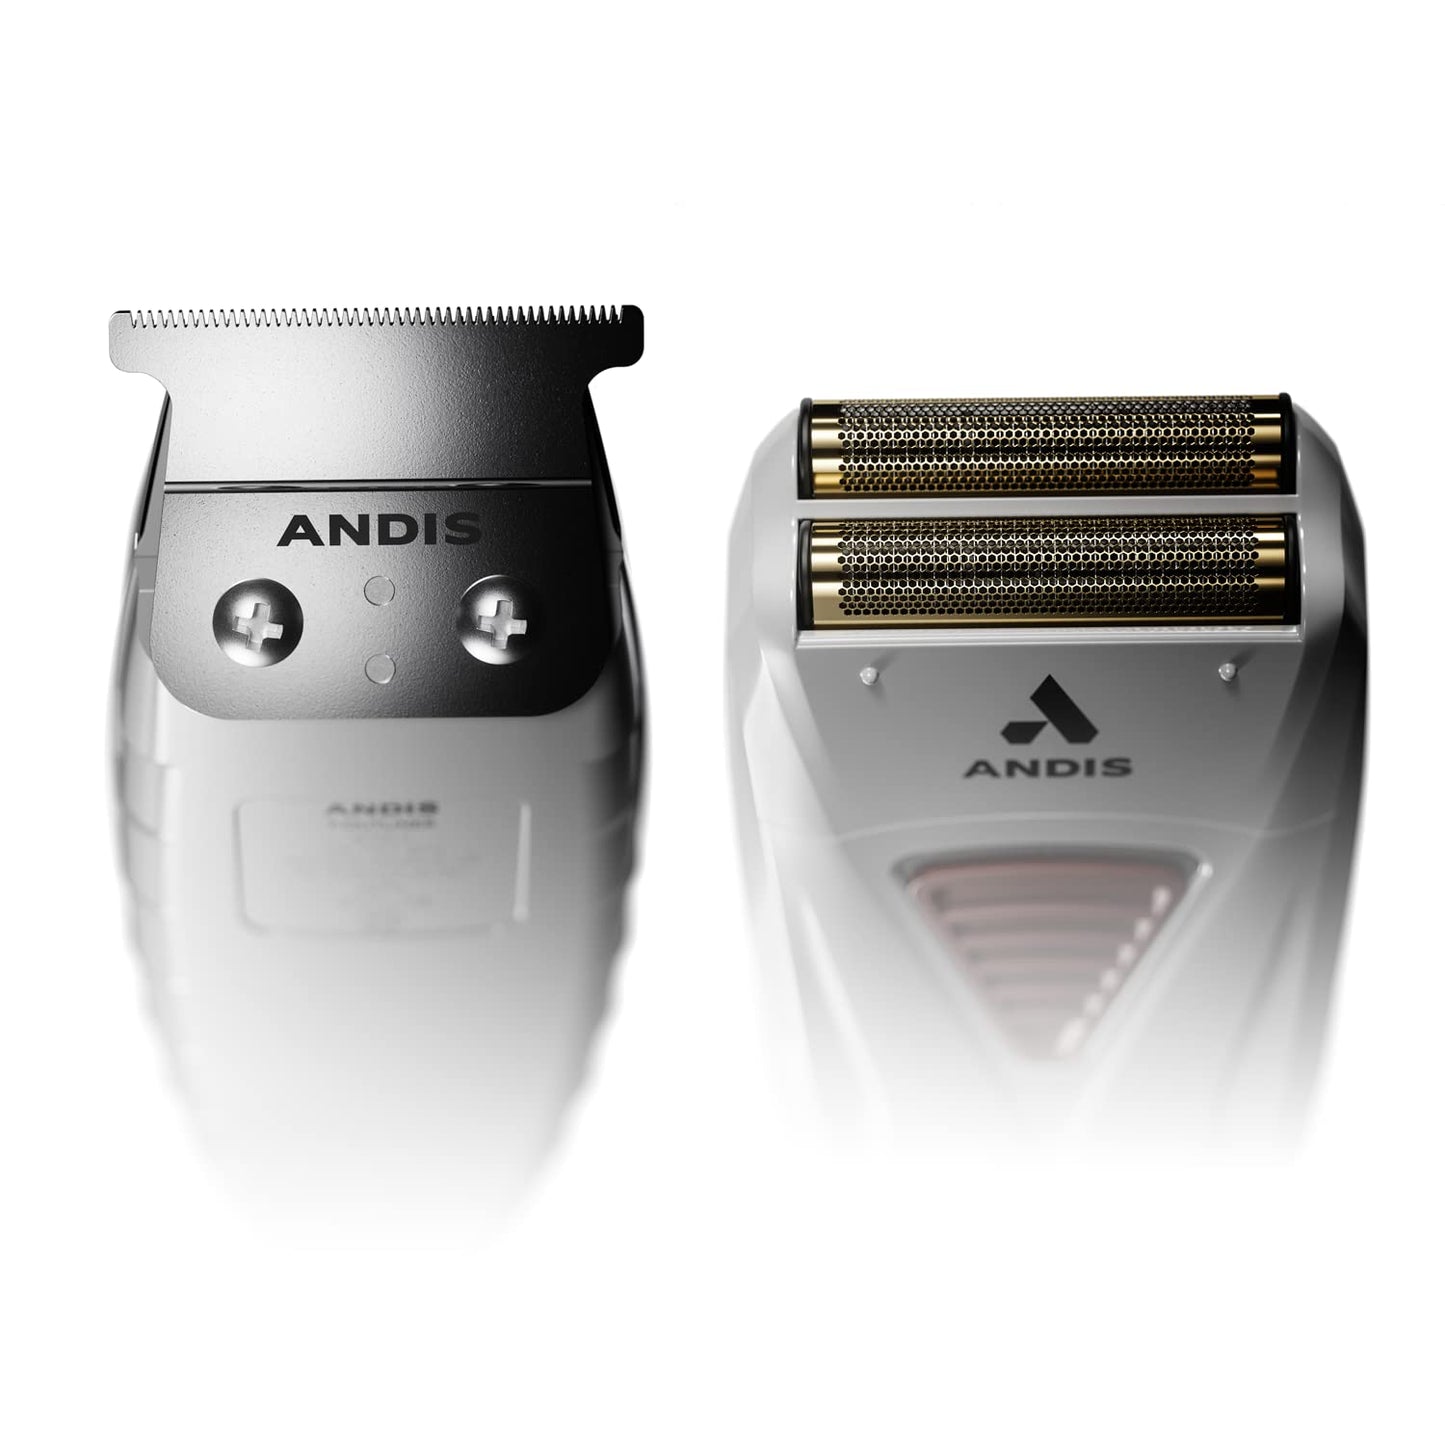 Andis 17270 Finishing Combo T-Outliner Trimmer & Pro Foil Lithium Titanium Foil Shaver - Professional Finishing Hair Clippers and Trimmer Kit for Men